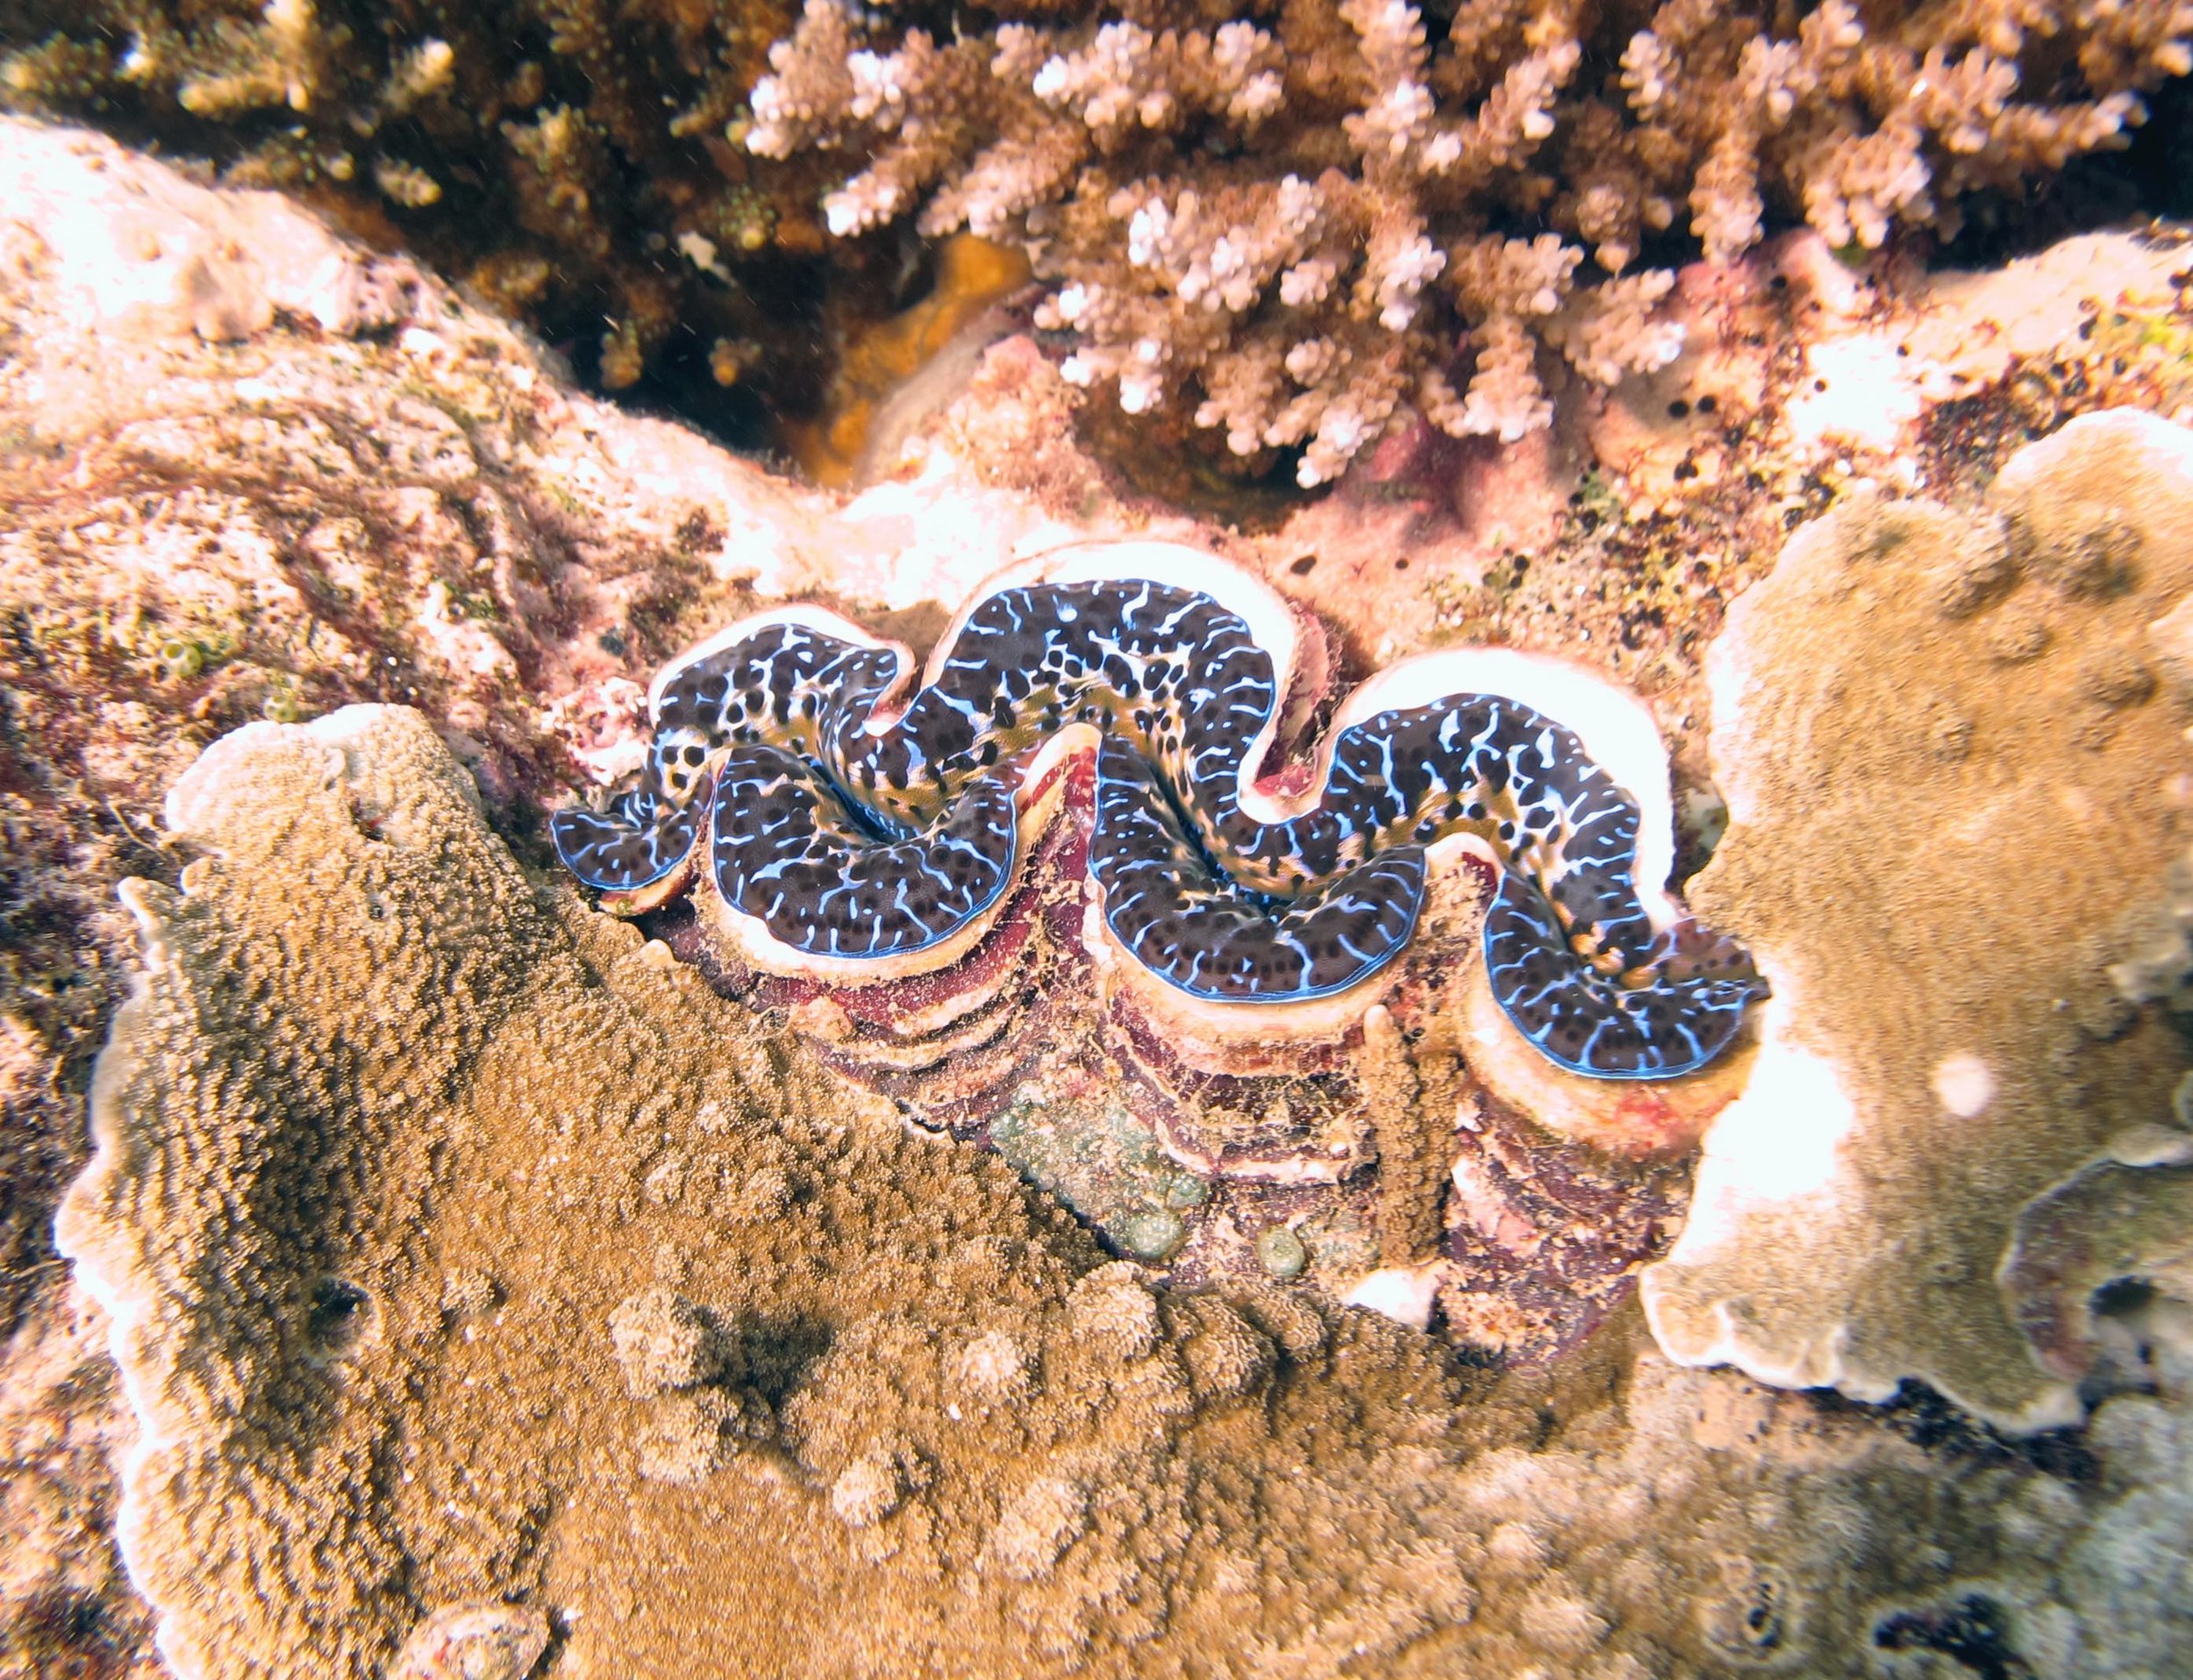 giant clam at Mago.jpg